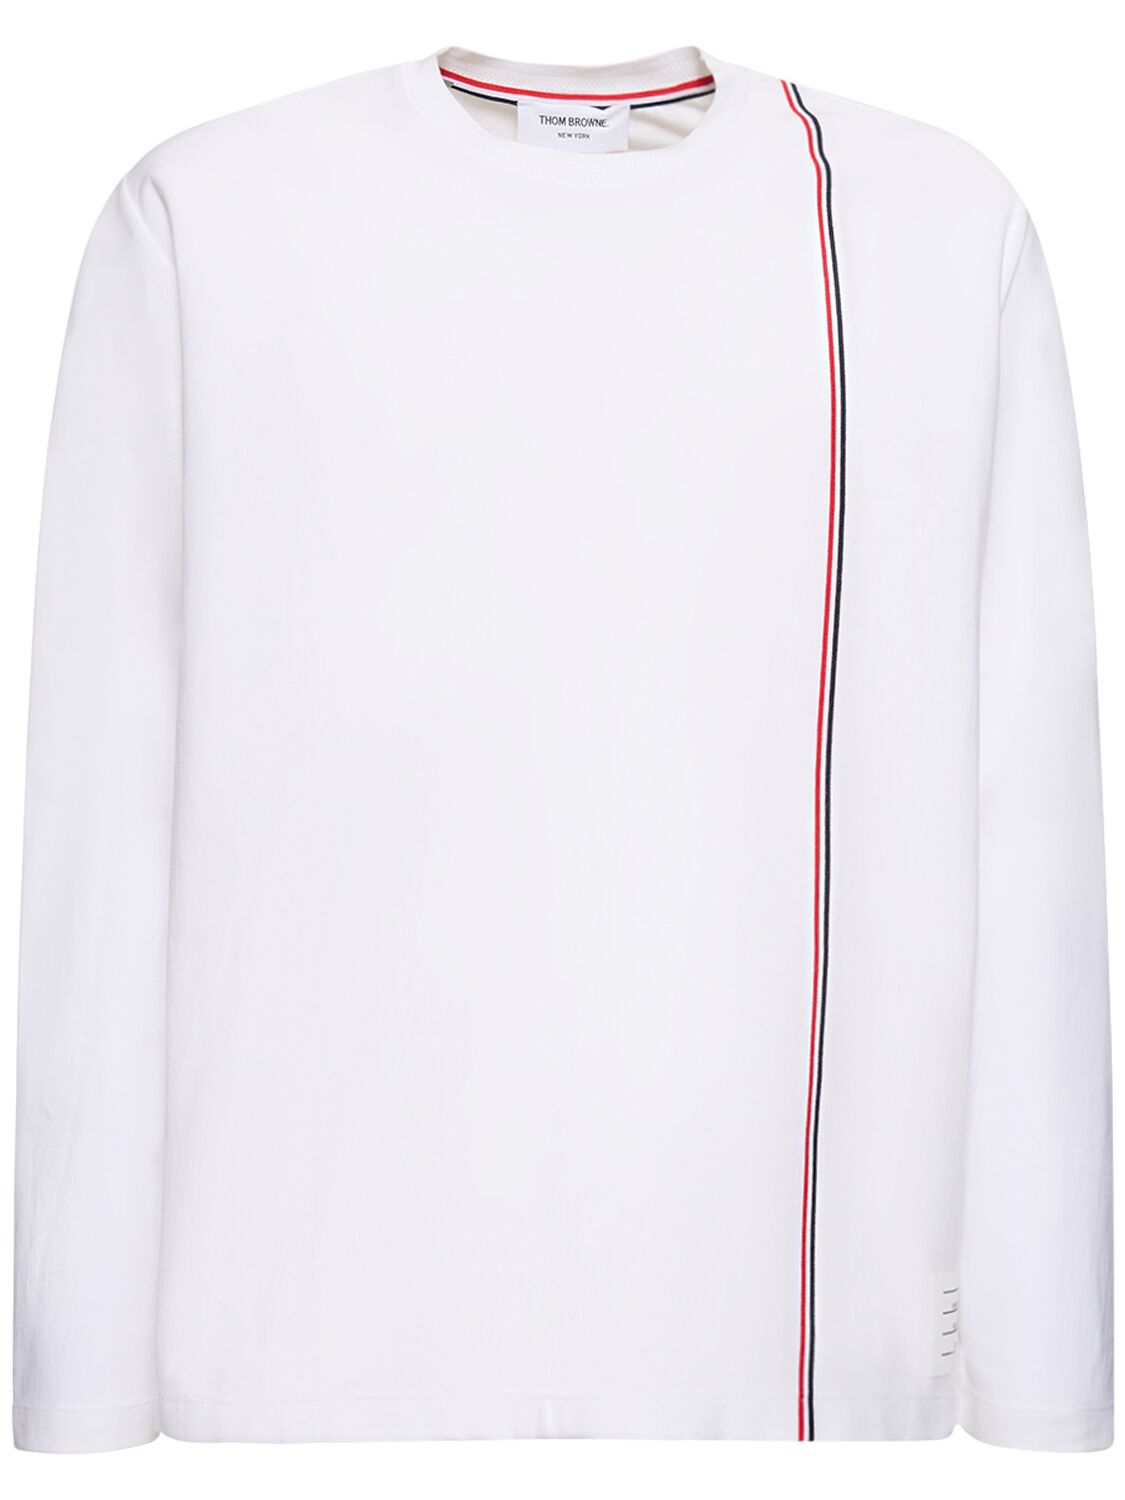 Thom Browne Oversized Cotton Long Sleeved T-shirt In White